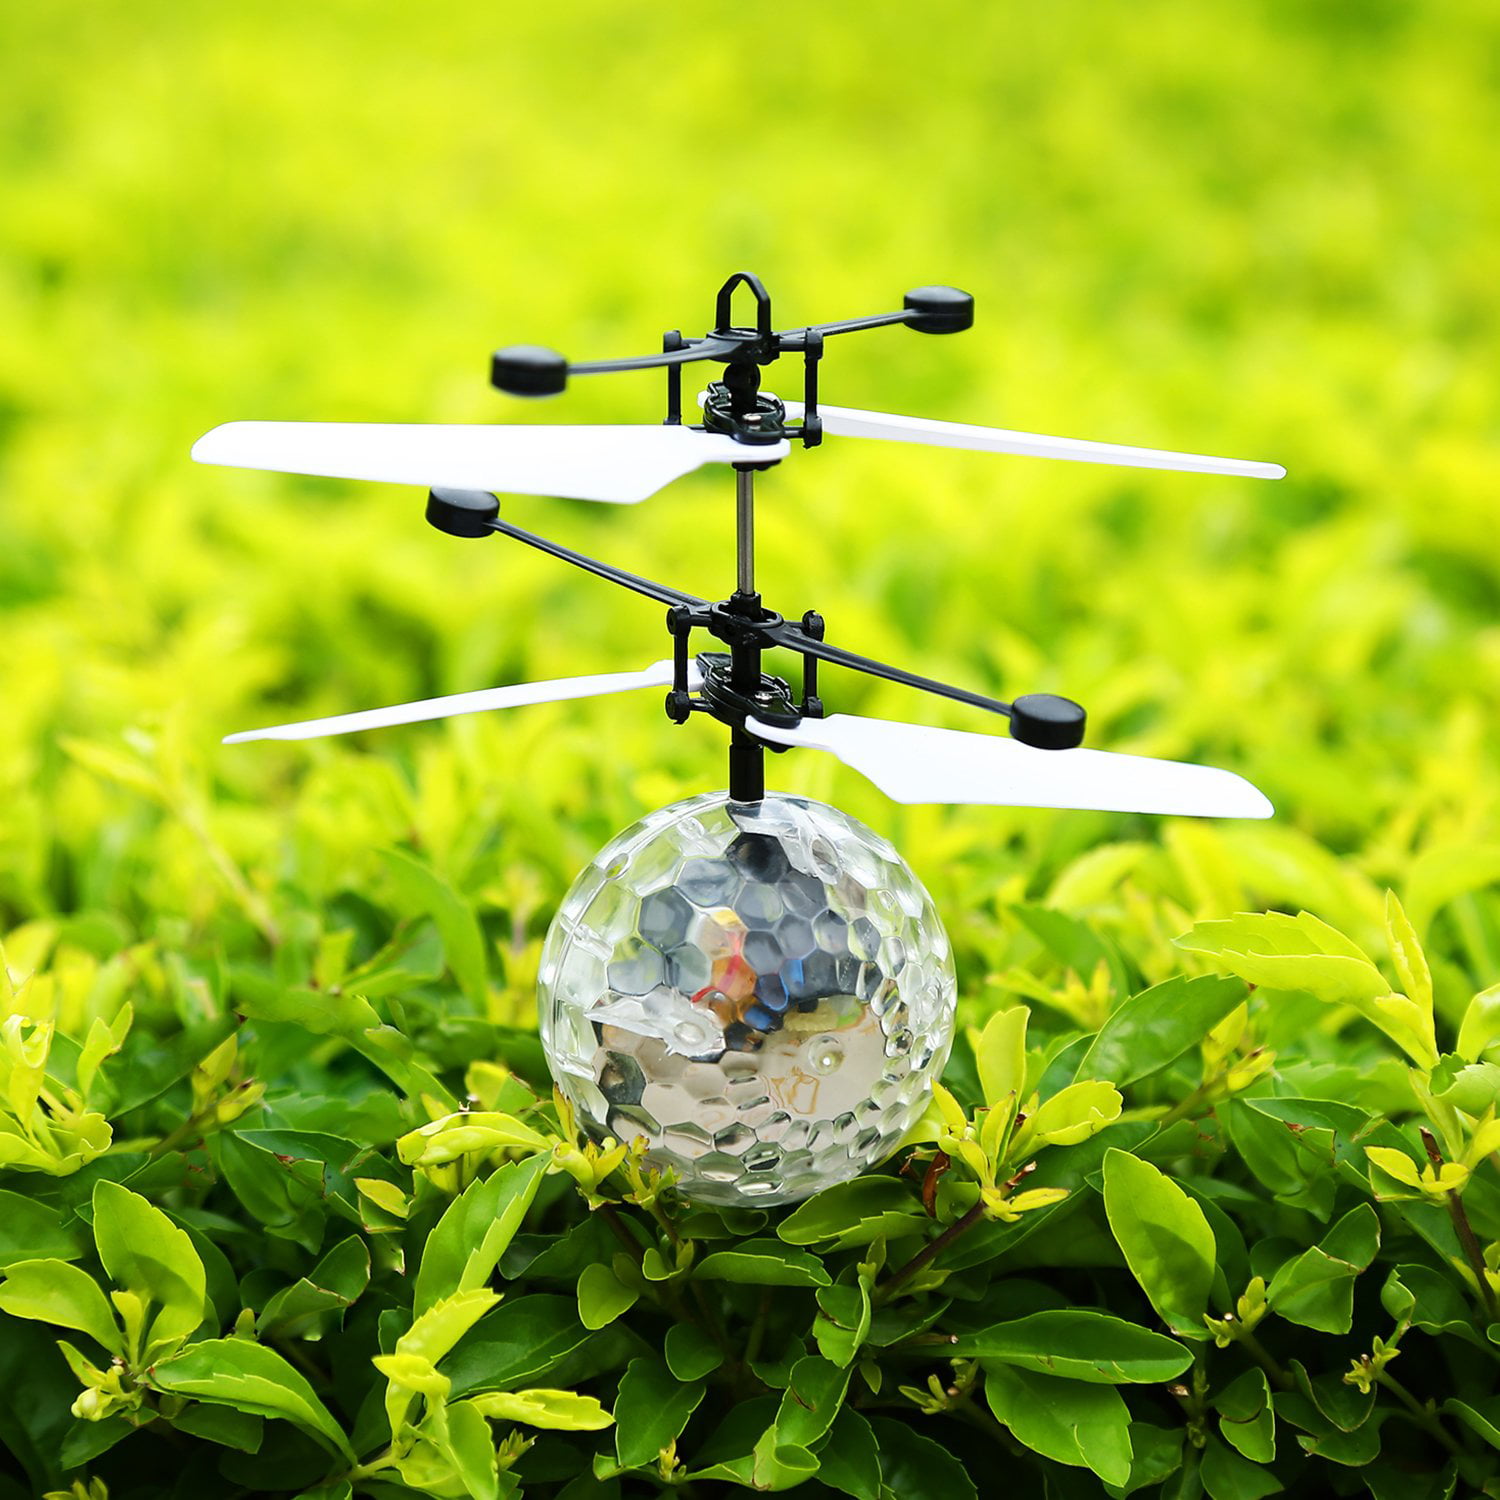 AMENON Kids Flying Ball Toys RC Flying Ball Toys 360° Rotating Hand Controlled Mini Drone Infrared Induction Helicopter with LED Light Fun Gadgets Indoor Outdoor Games for Boys Girls Teenager Gifts 